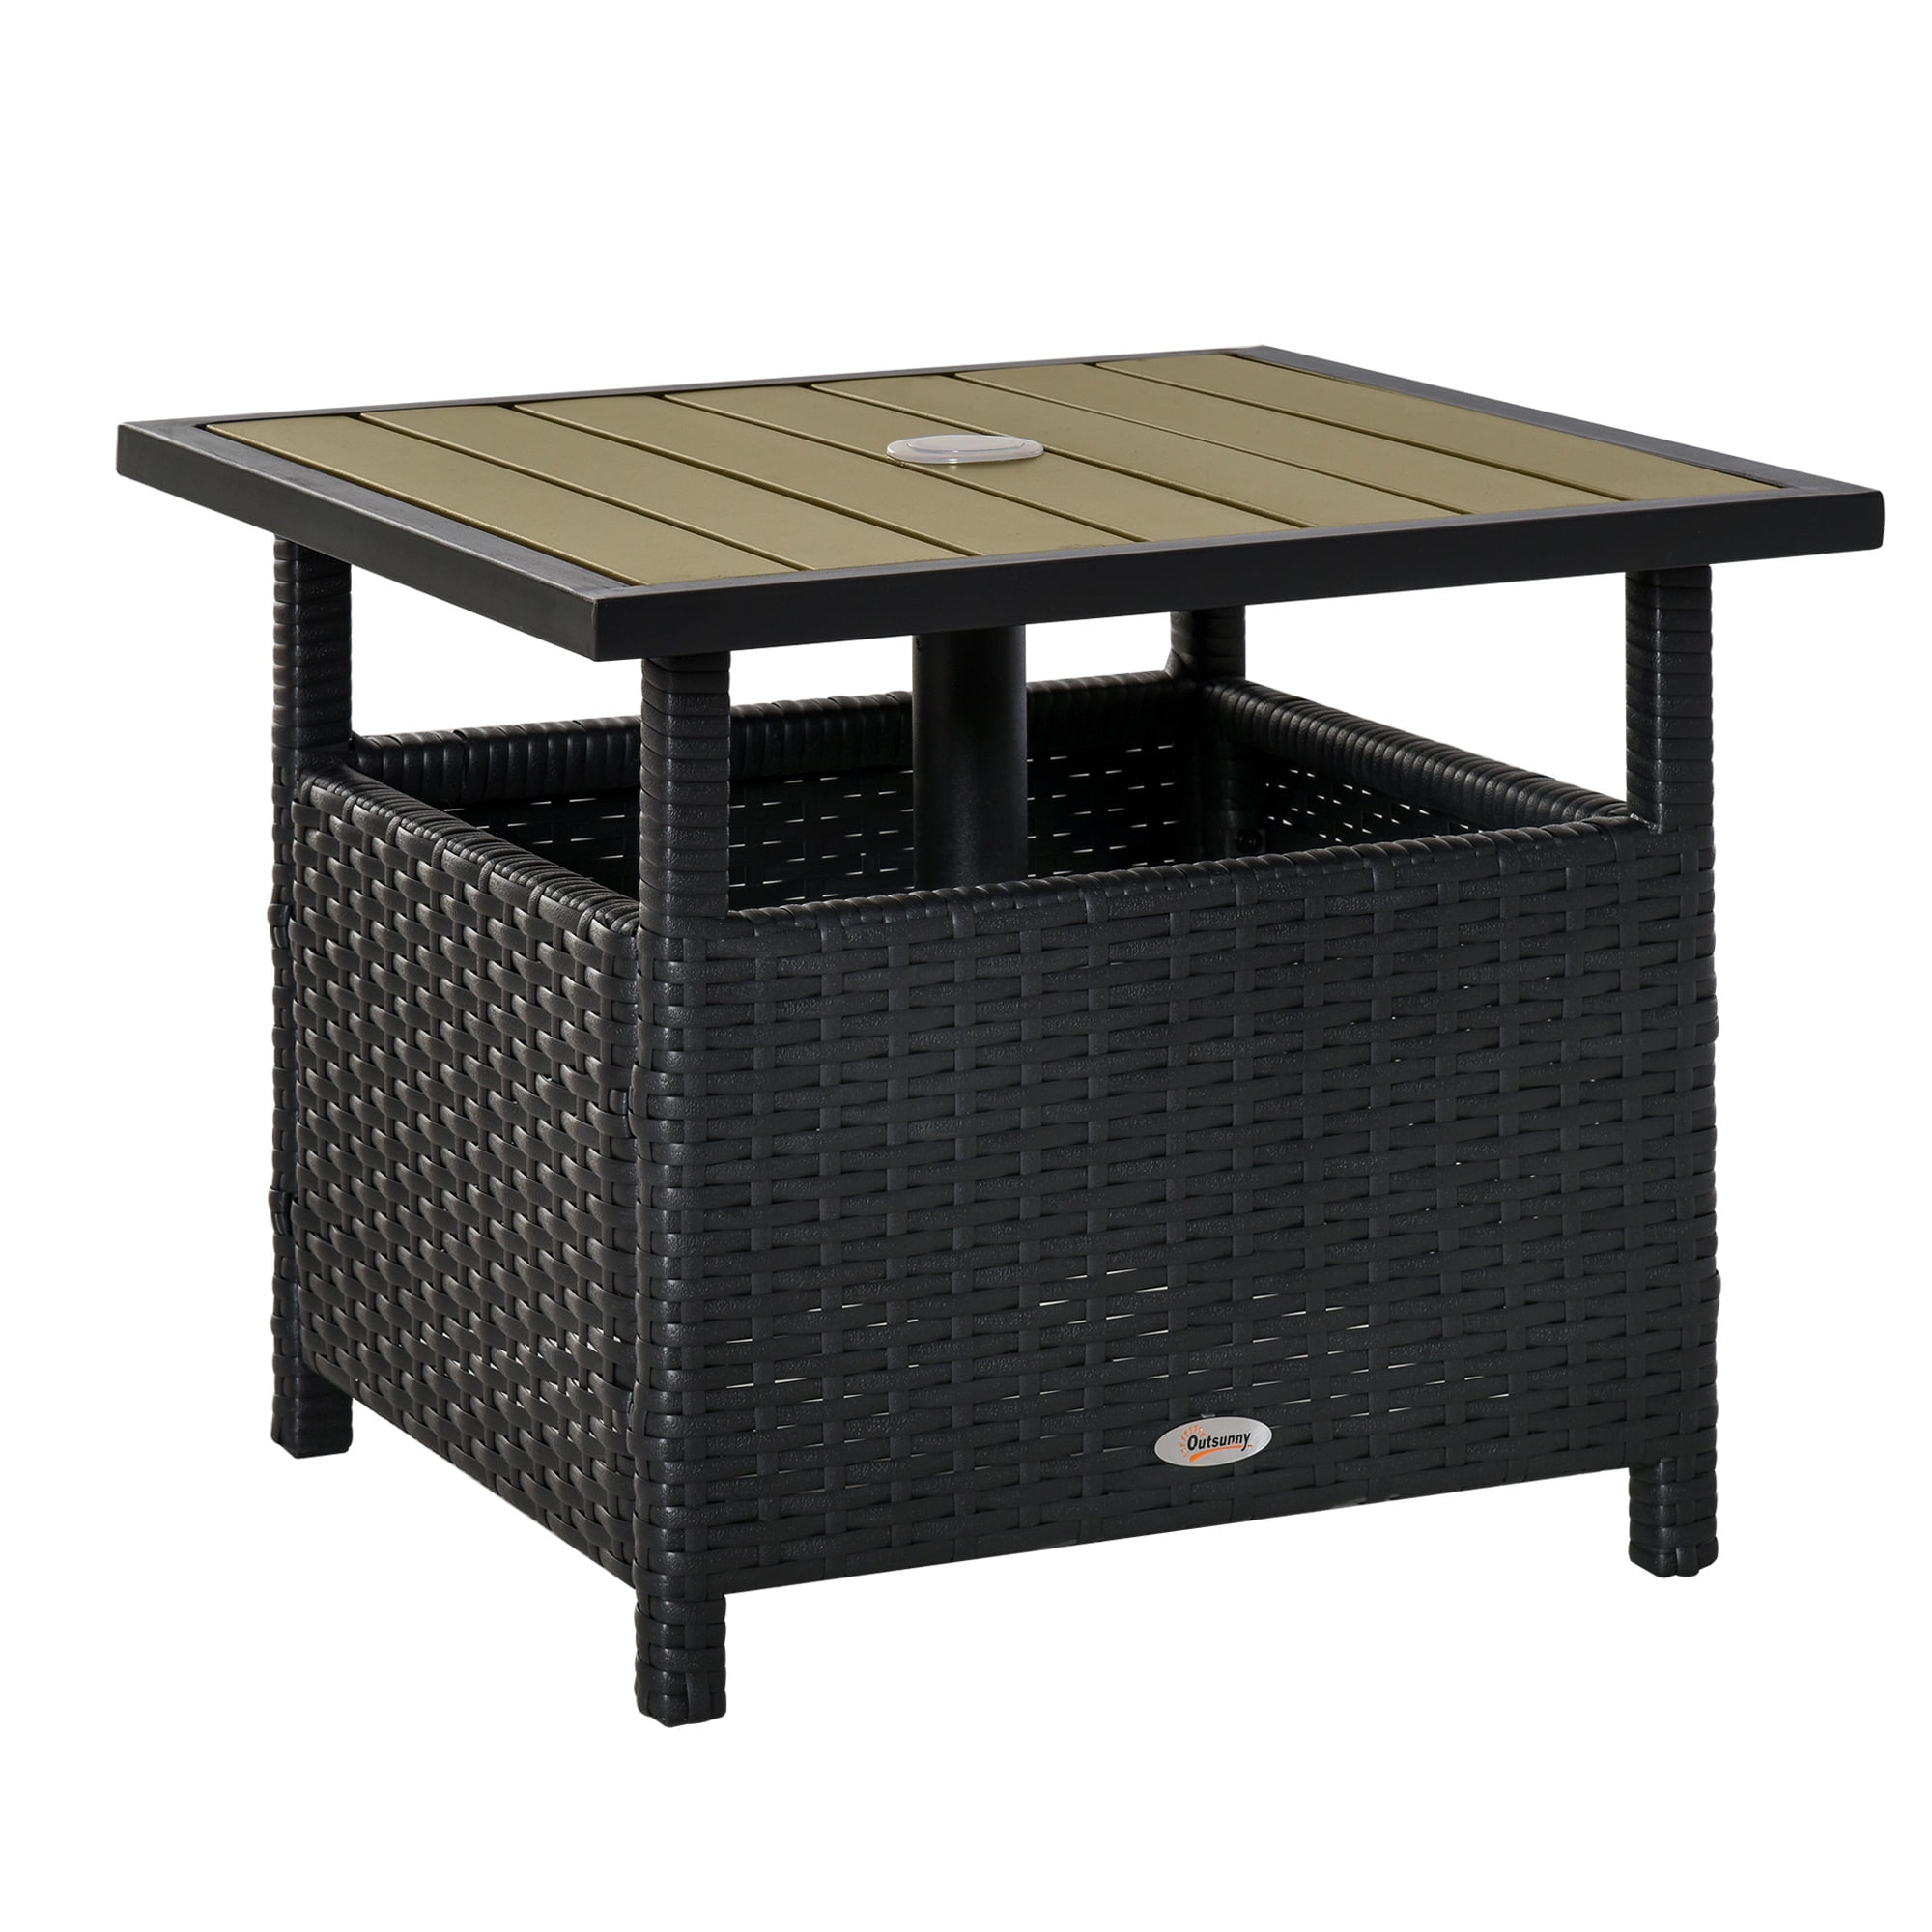 Outsunny 22'' Rattan Wicker Side Table with Steel Frame, Umbrella